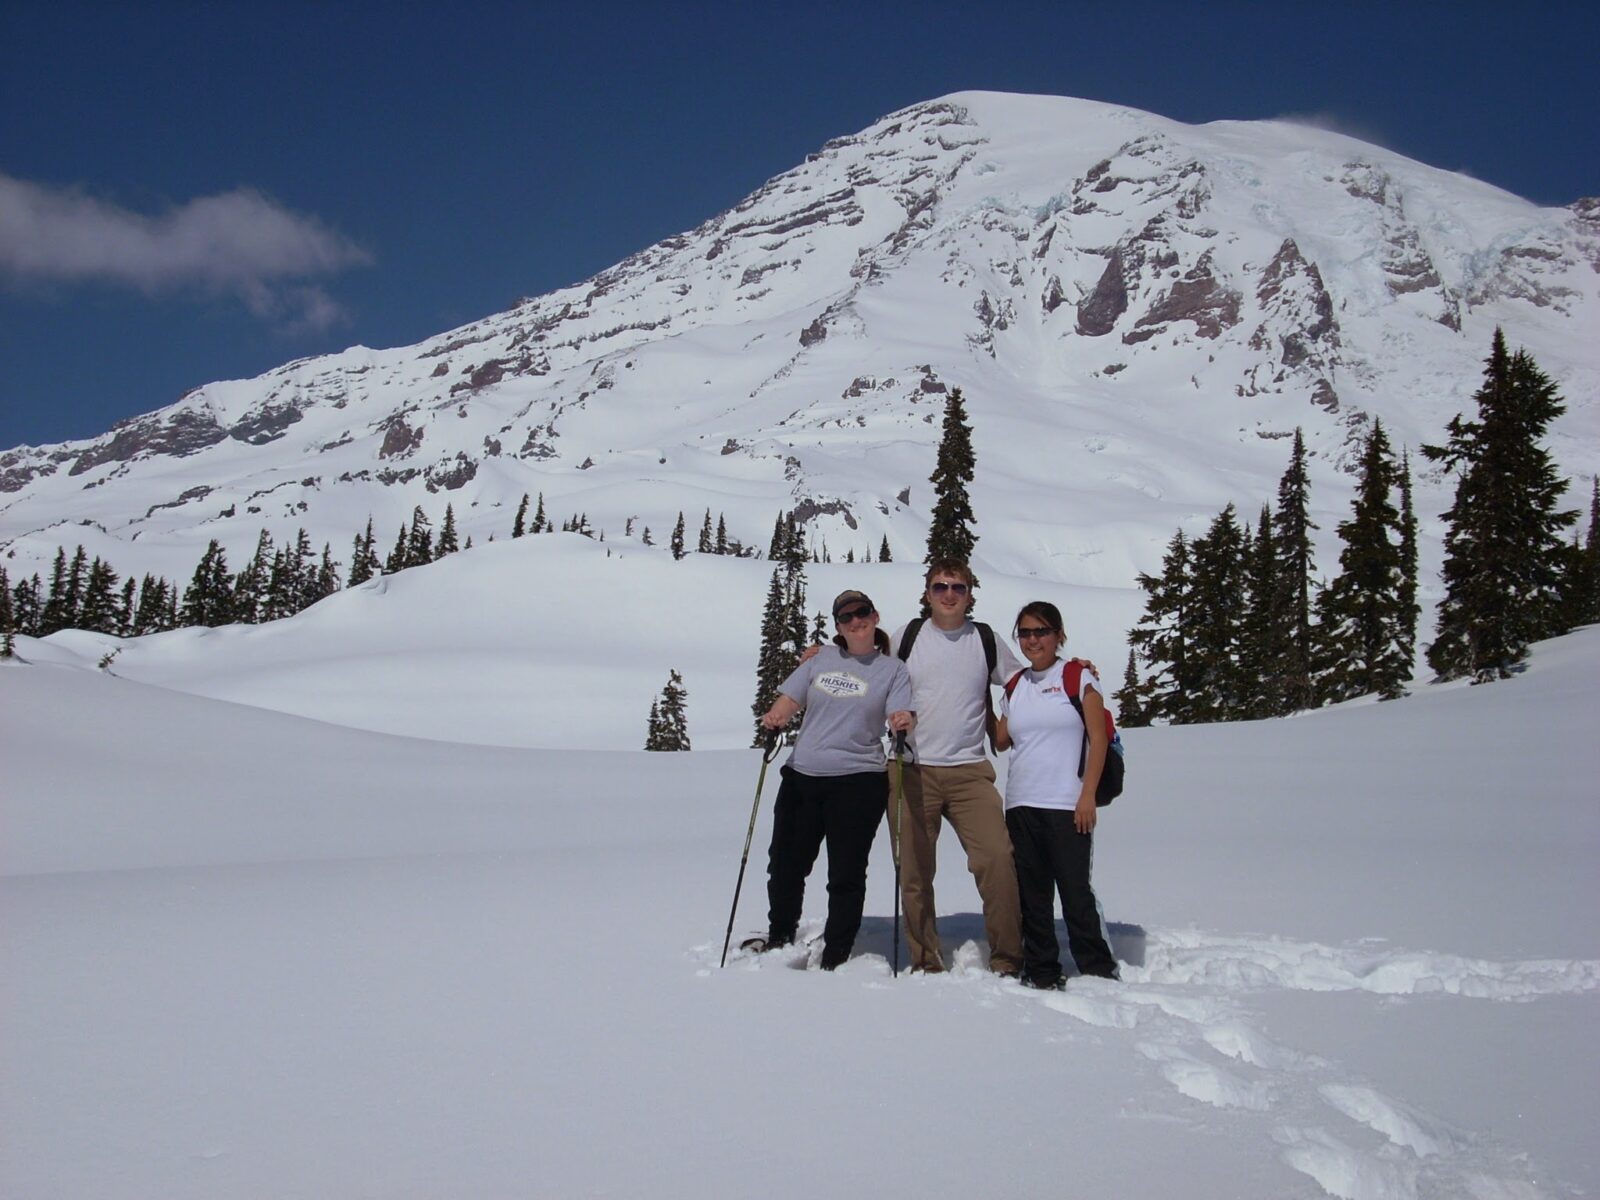 Three hikers pose for the camera in snow in front of Mt Rainier. They are wearing snowshoes, t shirts and sunglasses. Evergreen trees are visible as well.